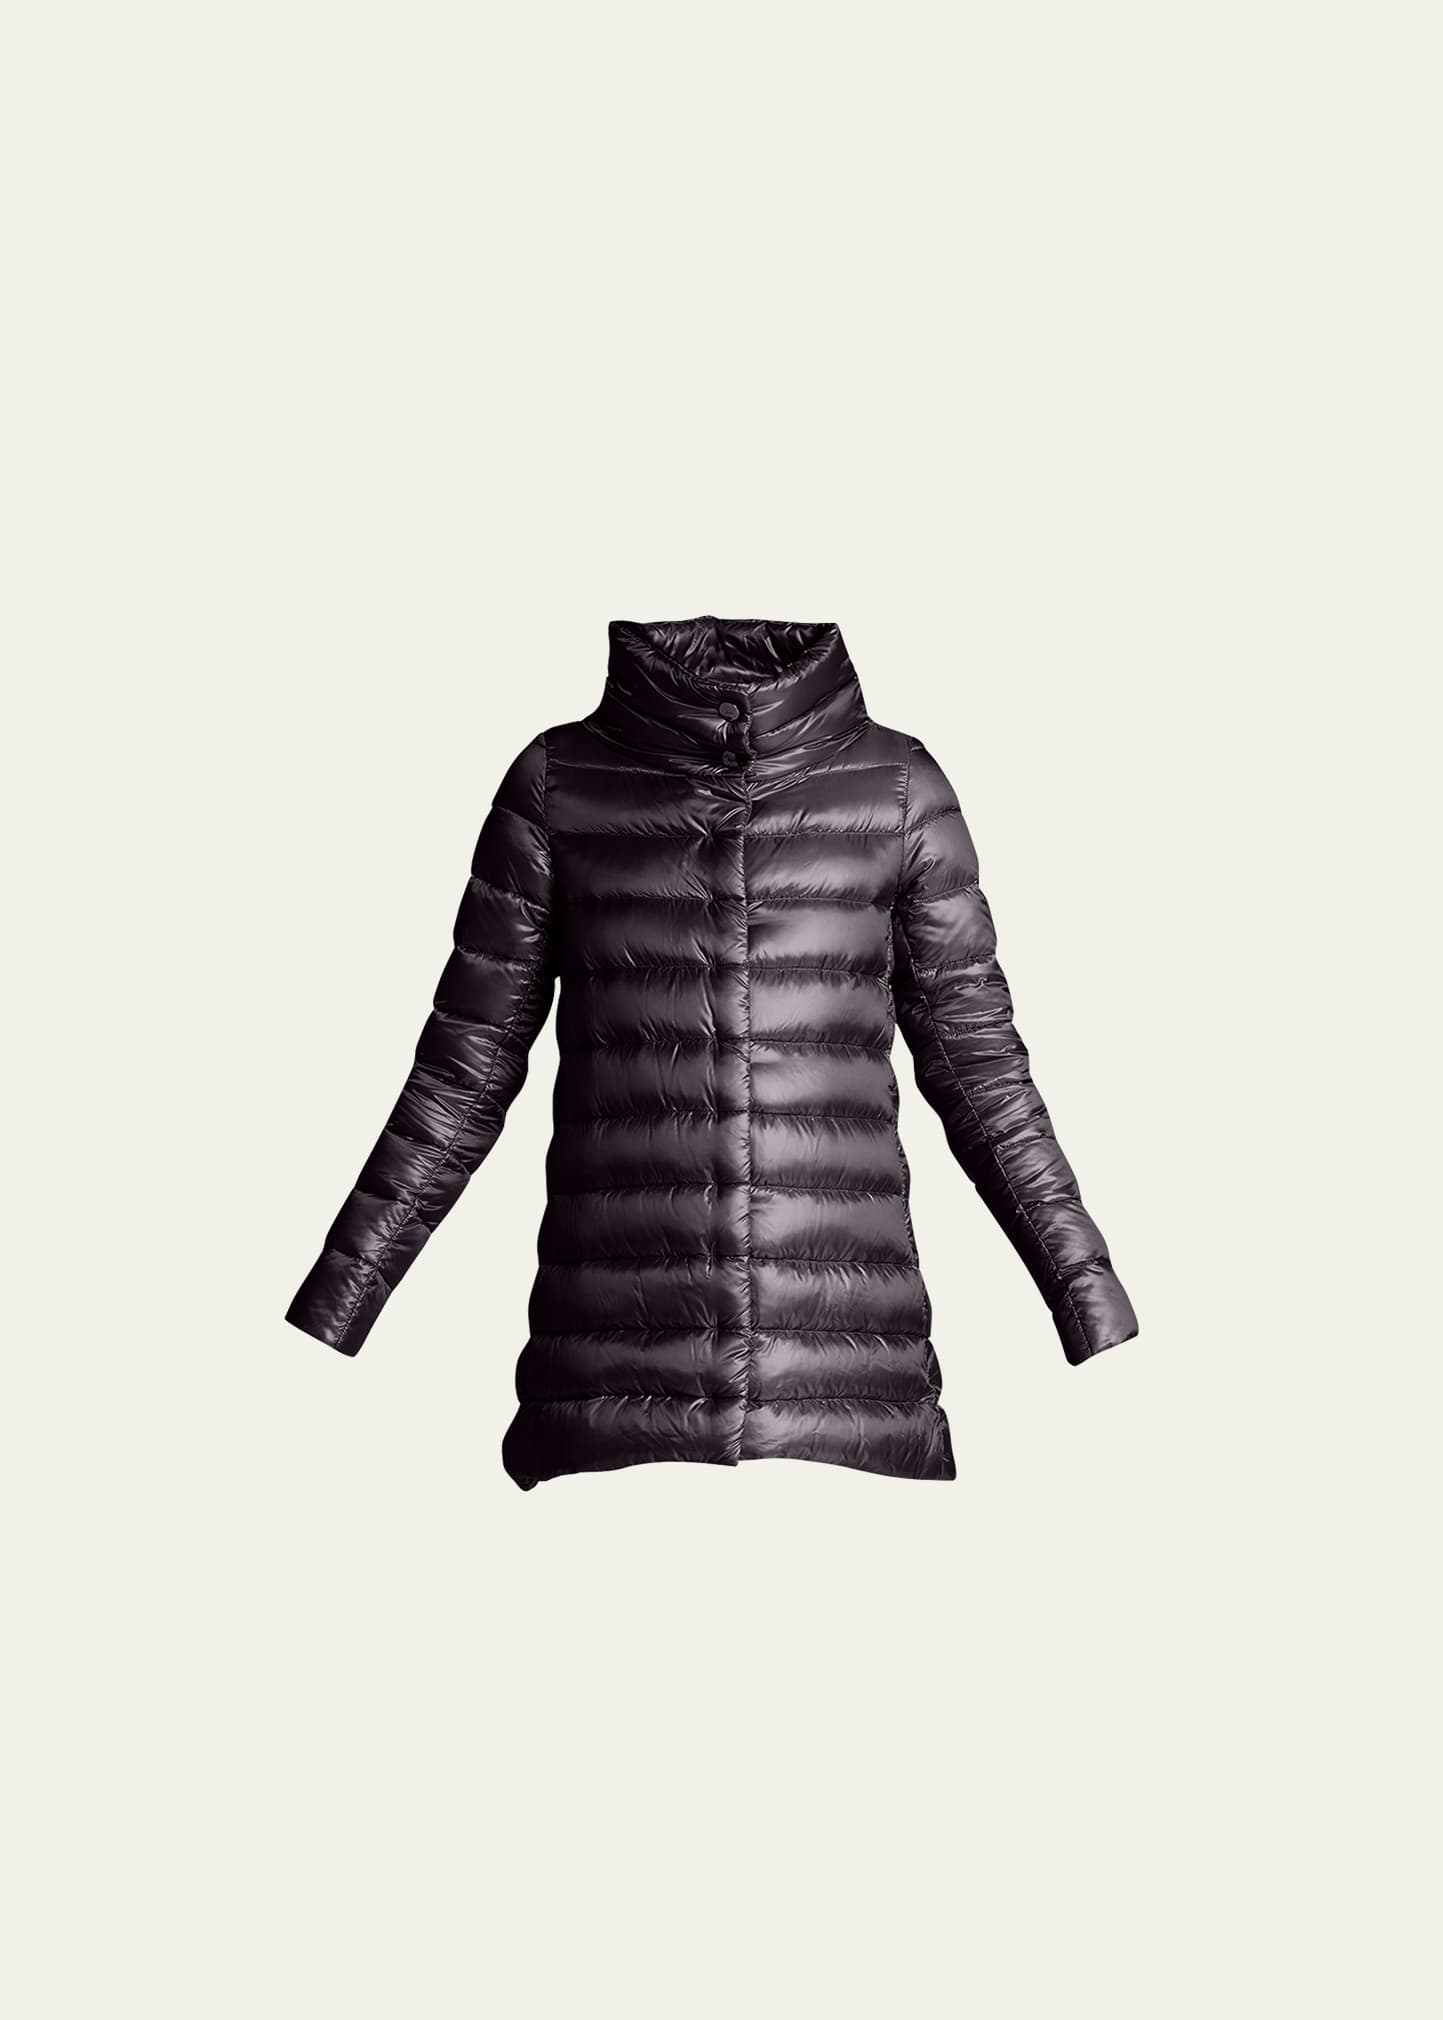 Ribbed High-Low Down Puffer Jacket